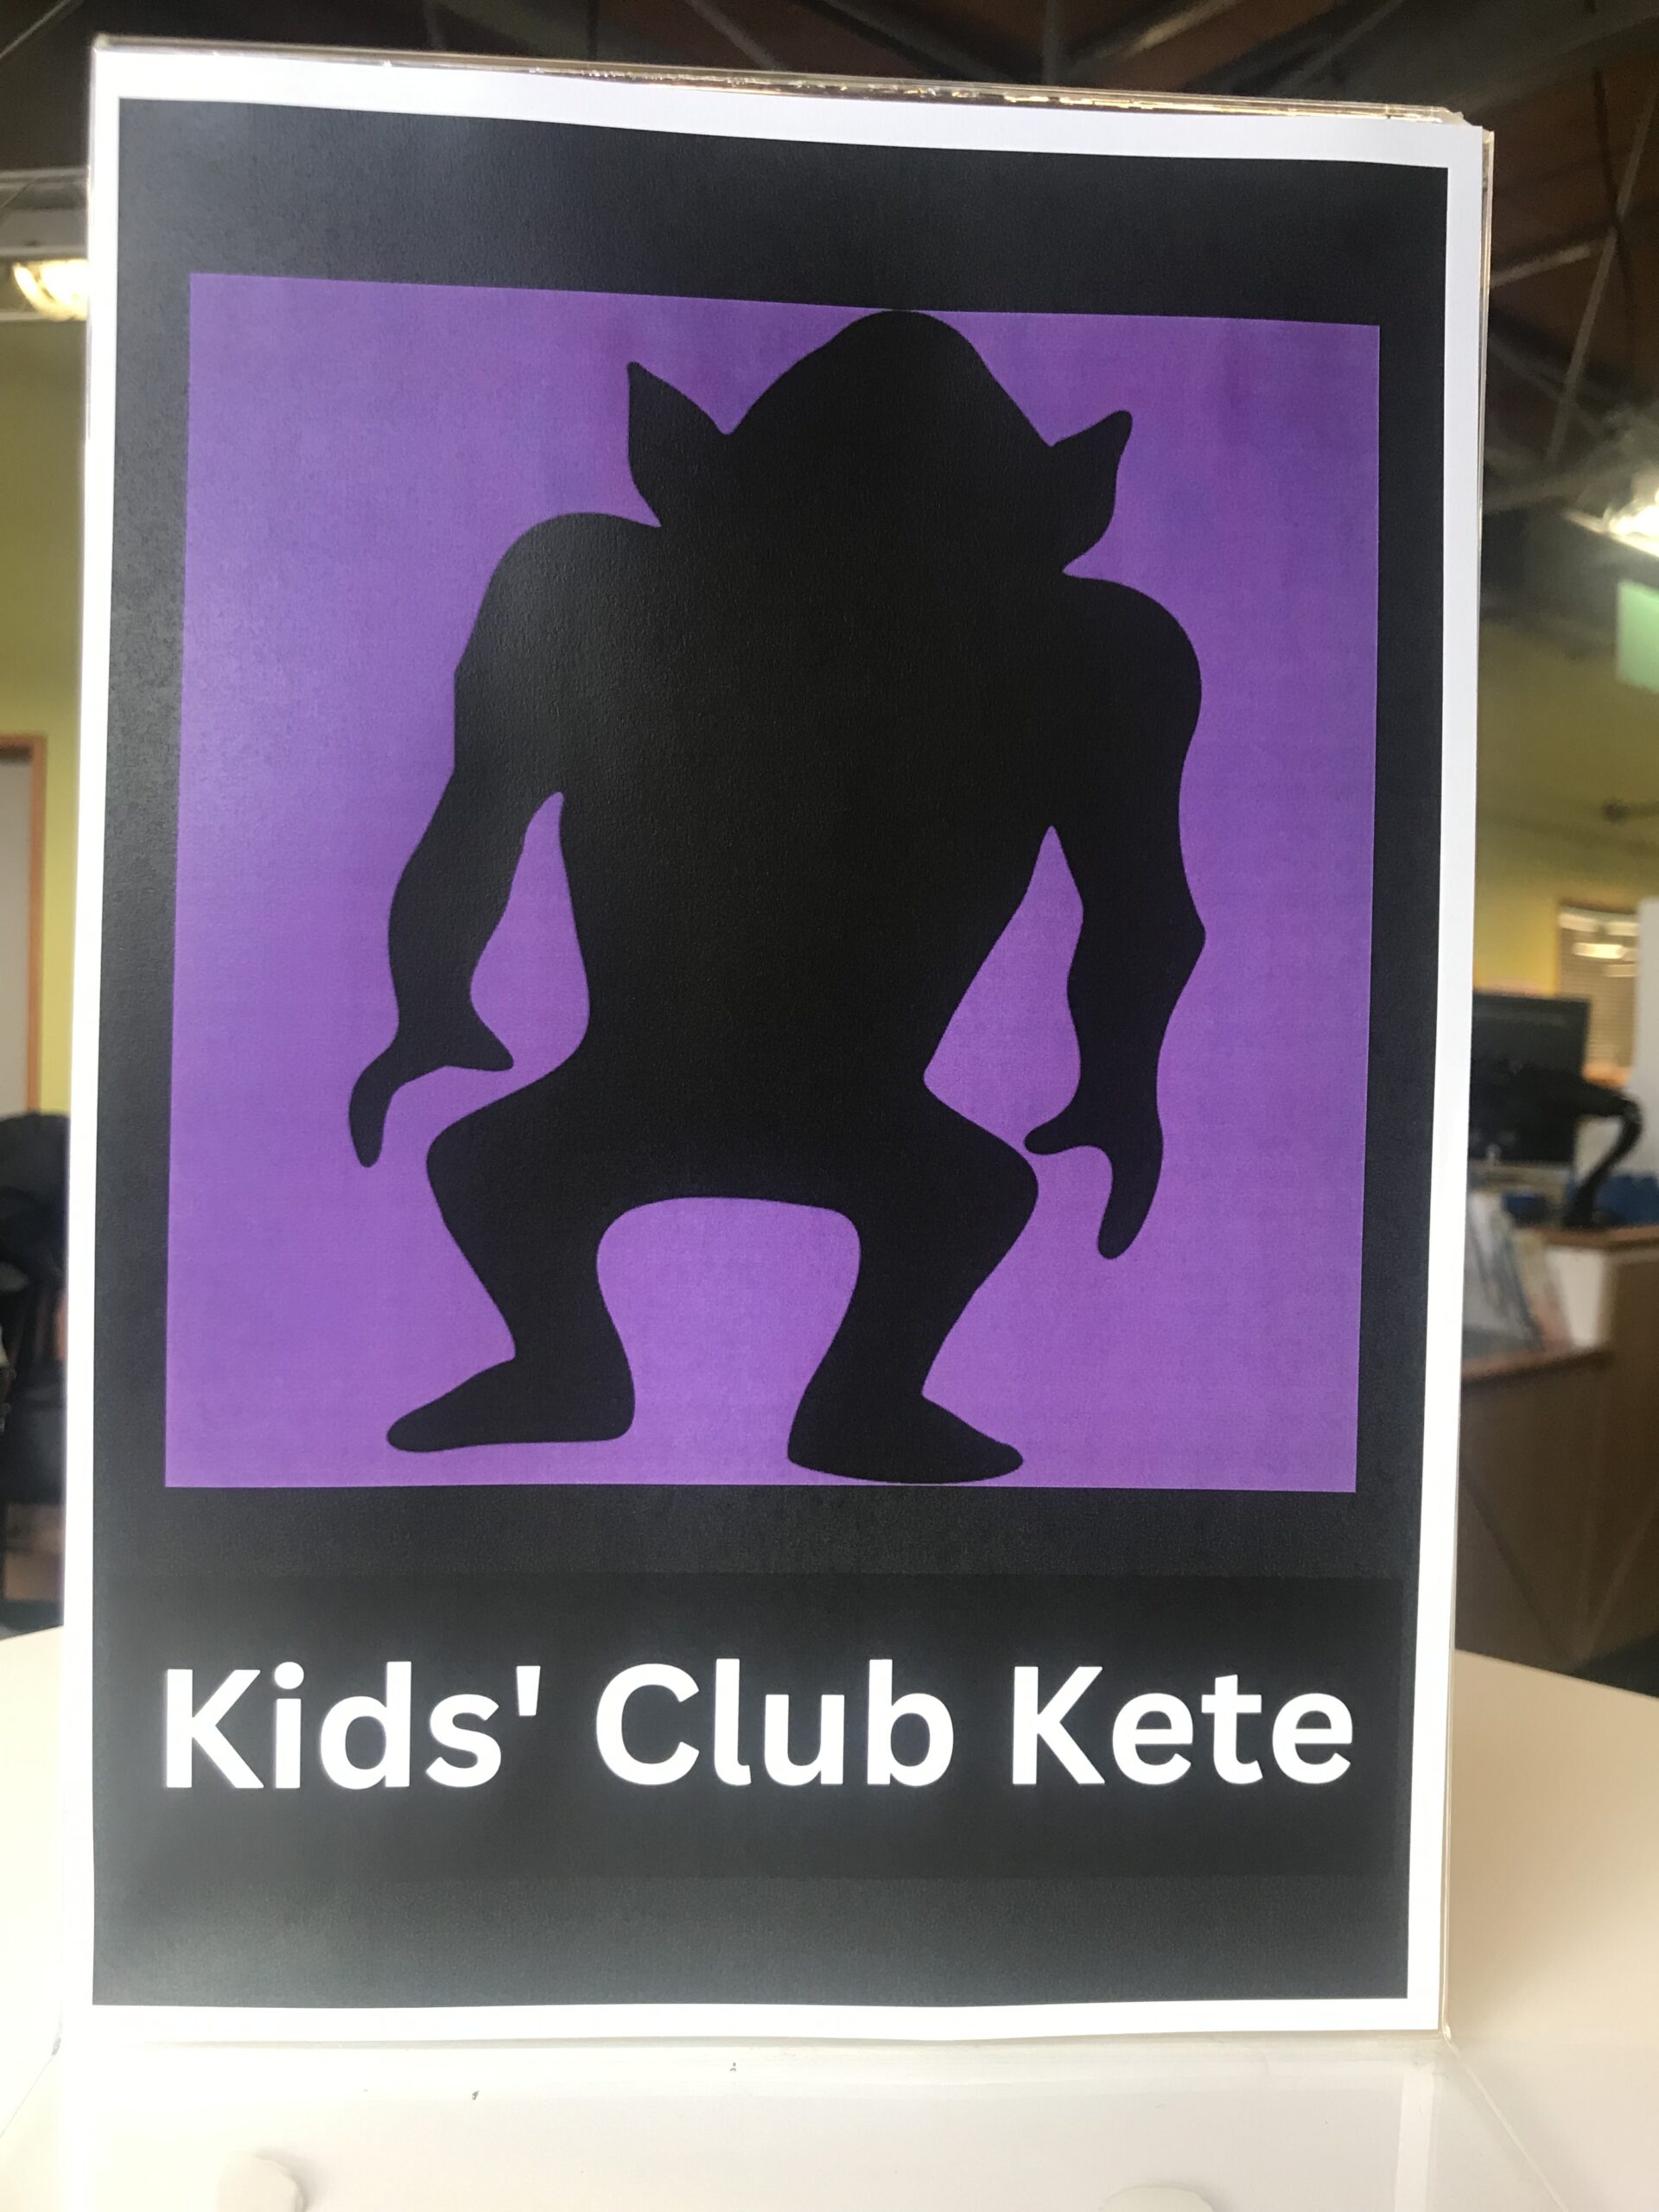 Kids' Club Kete image of a Friendly Monster